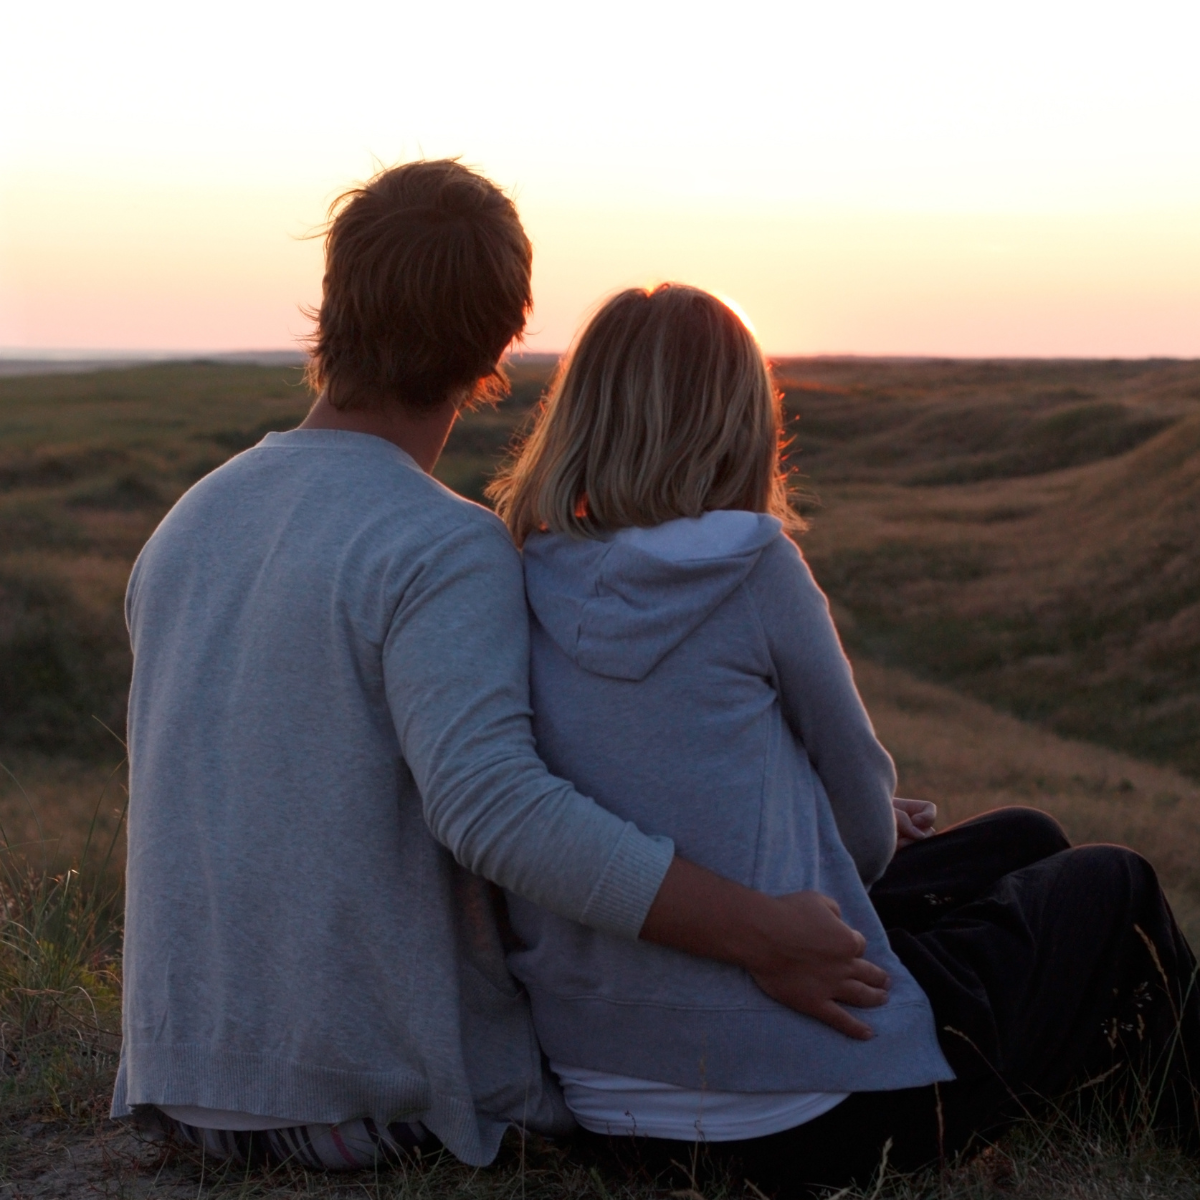 Couple watching the sunset together: Featured in: Learn to stop catching feelings so quickly